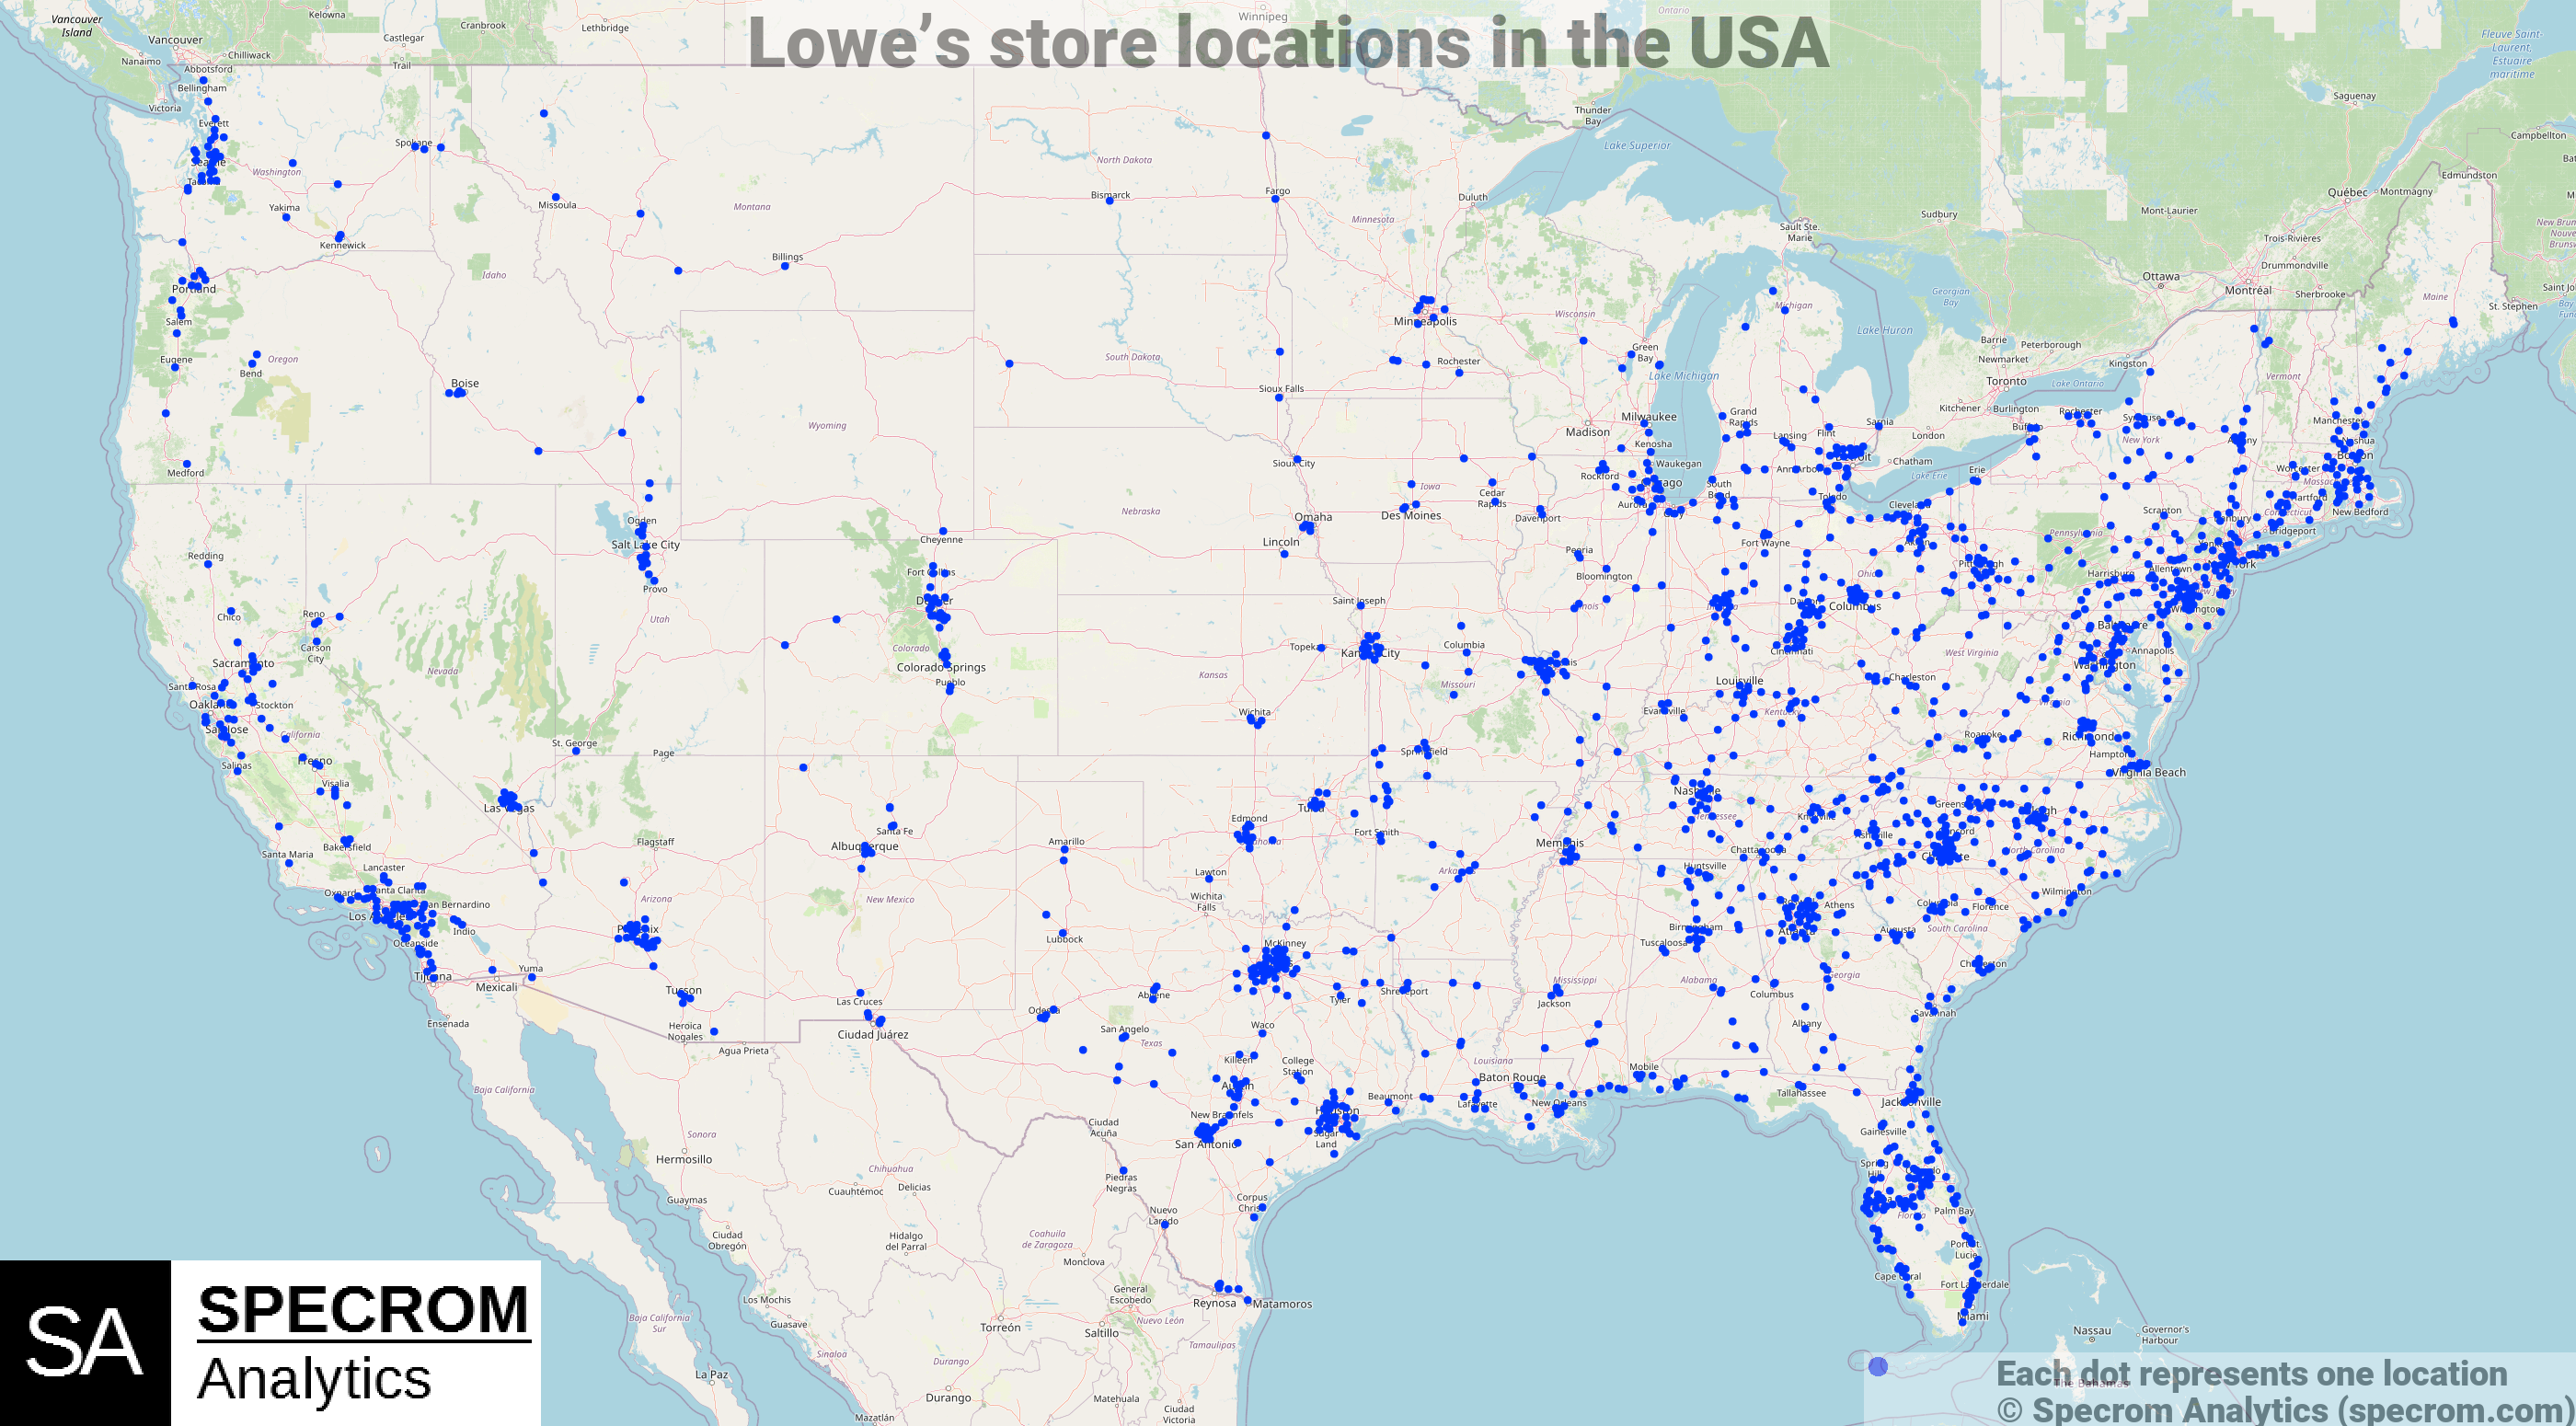 Lowe's store locations in the USA